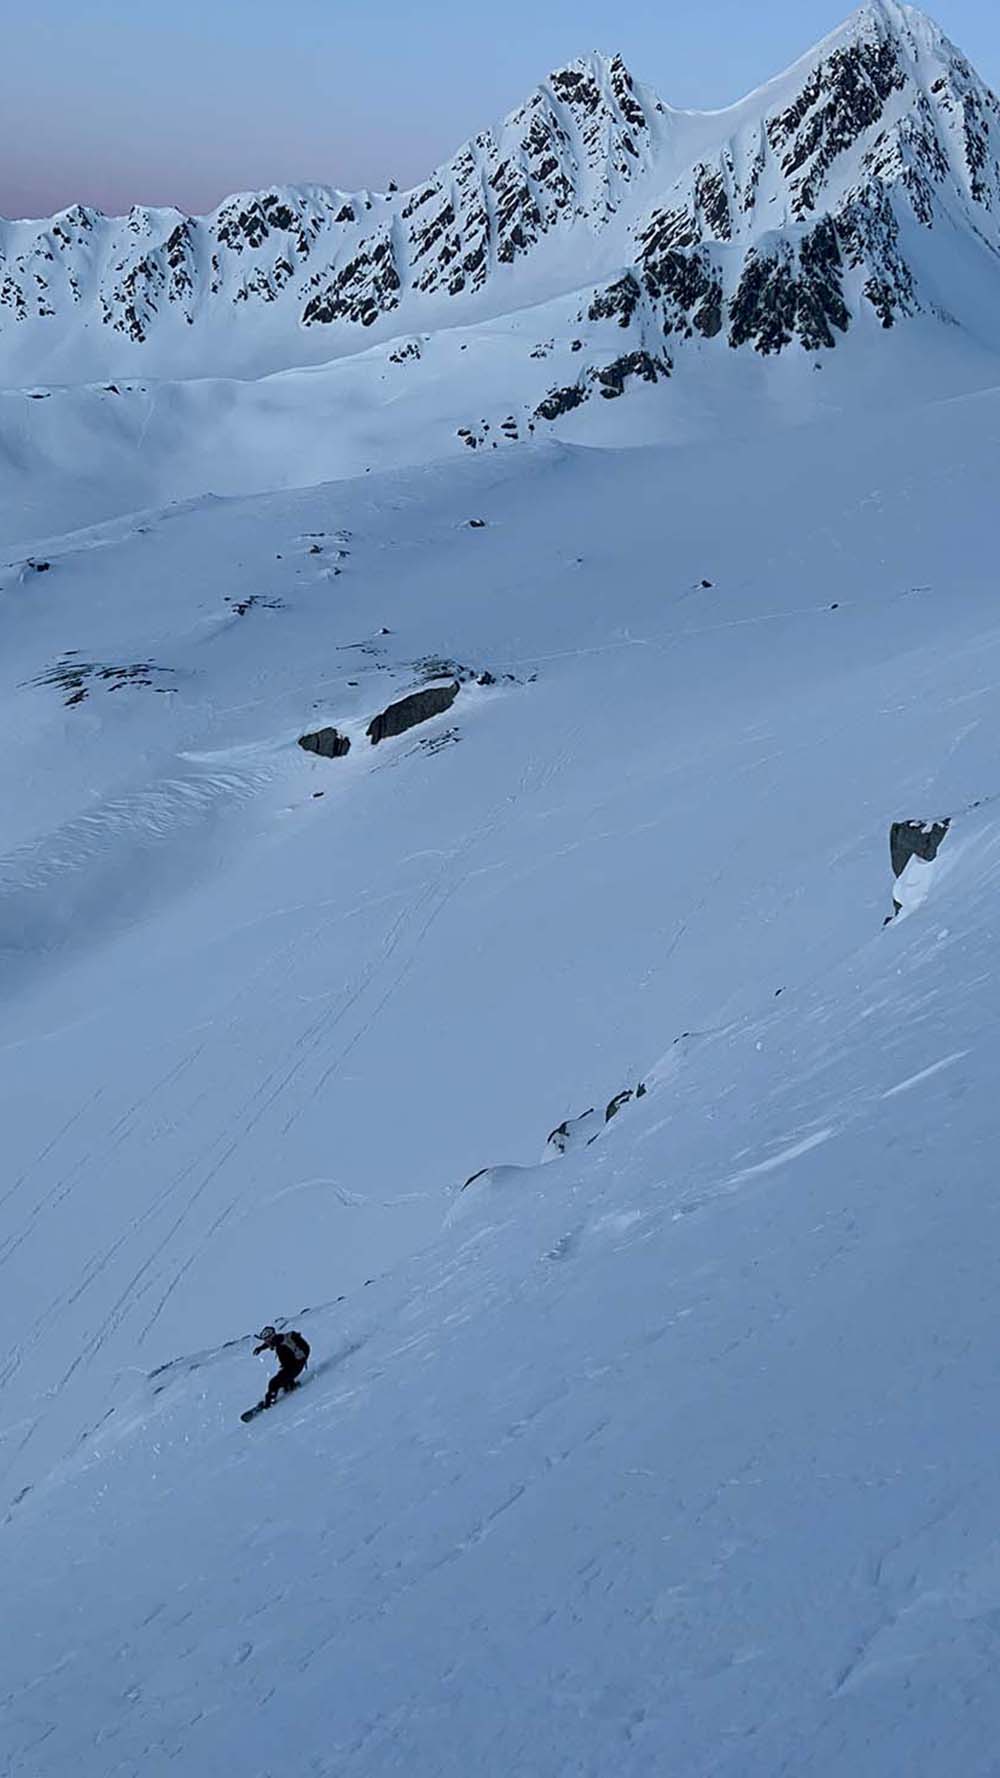 Carving some powder on the way down